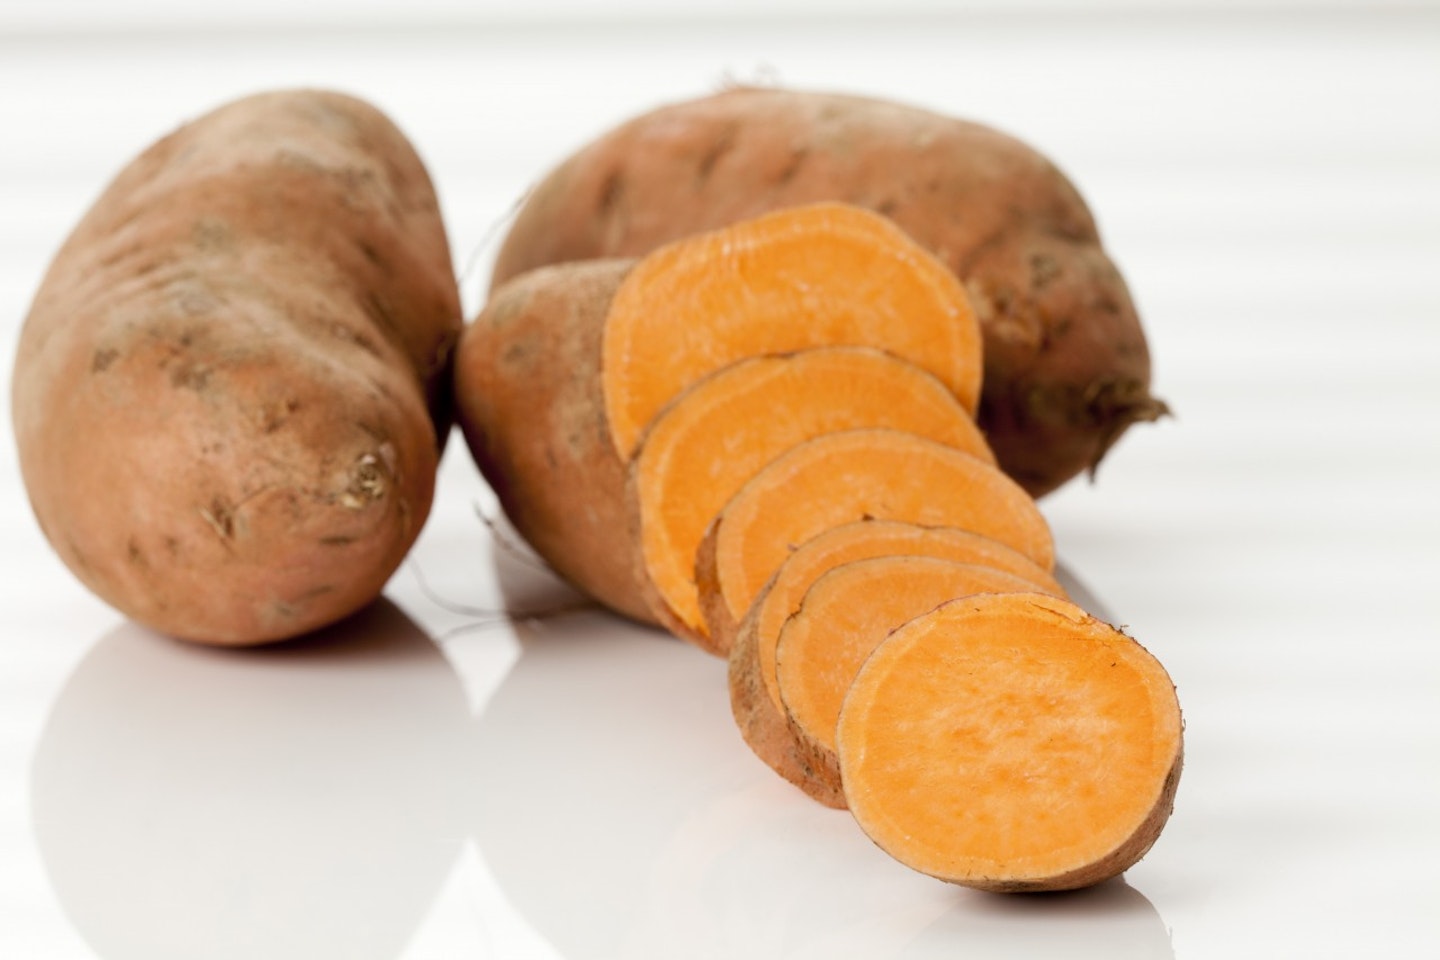 Sliced and whole sweet potatoes, close up